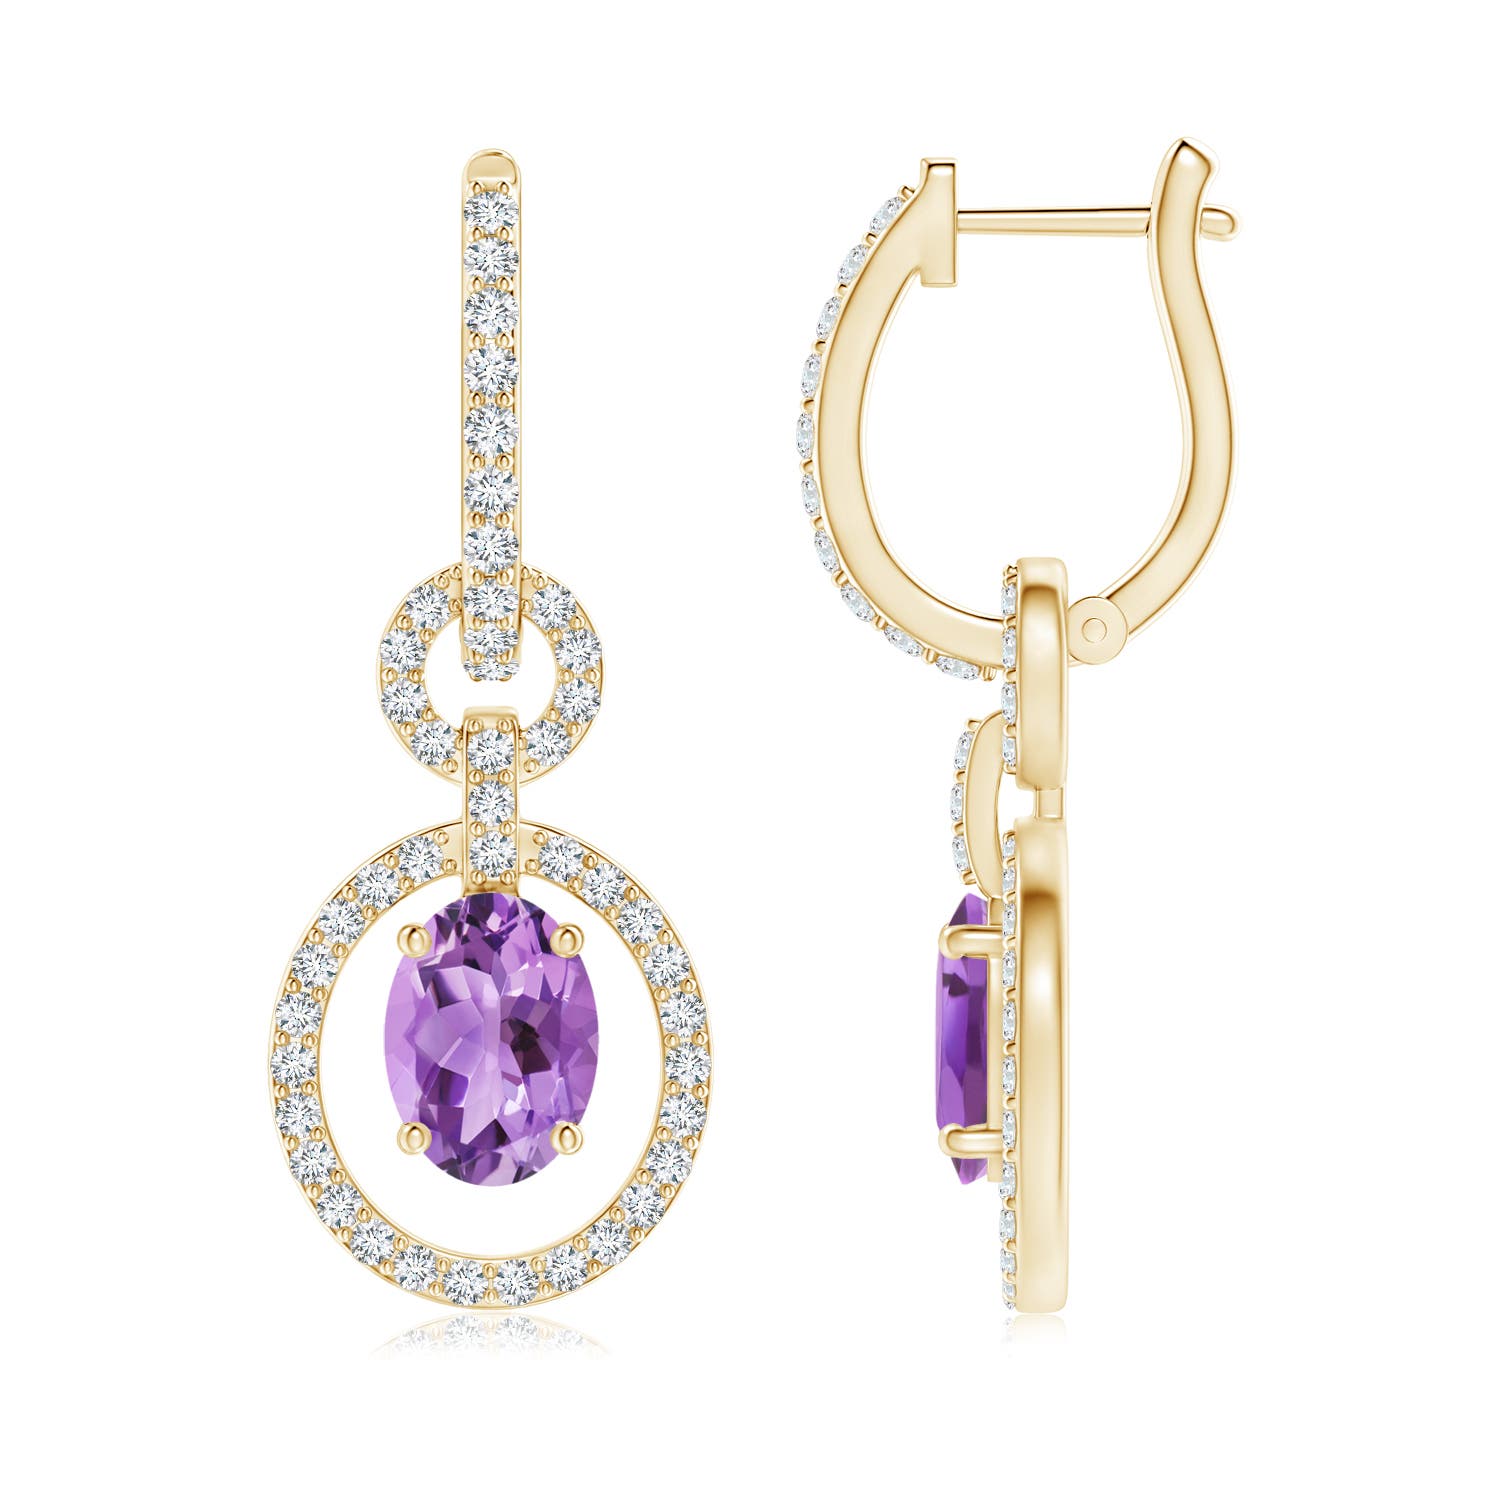 A - Amethyst / 2.02 CT / 14 KT Yellow Gold